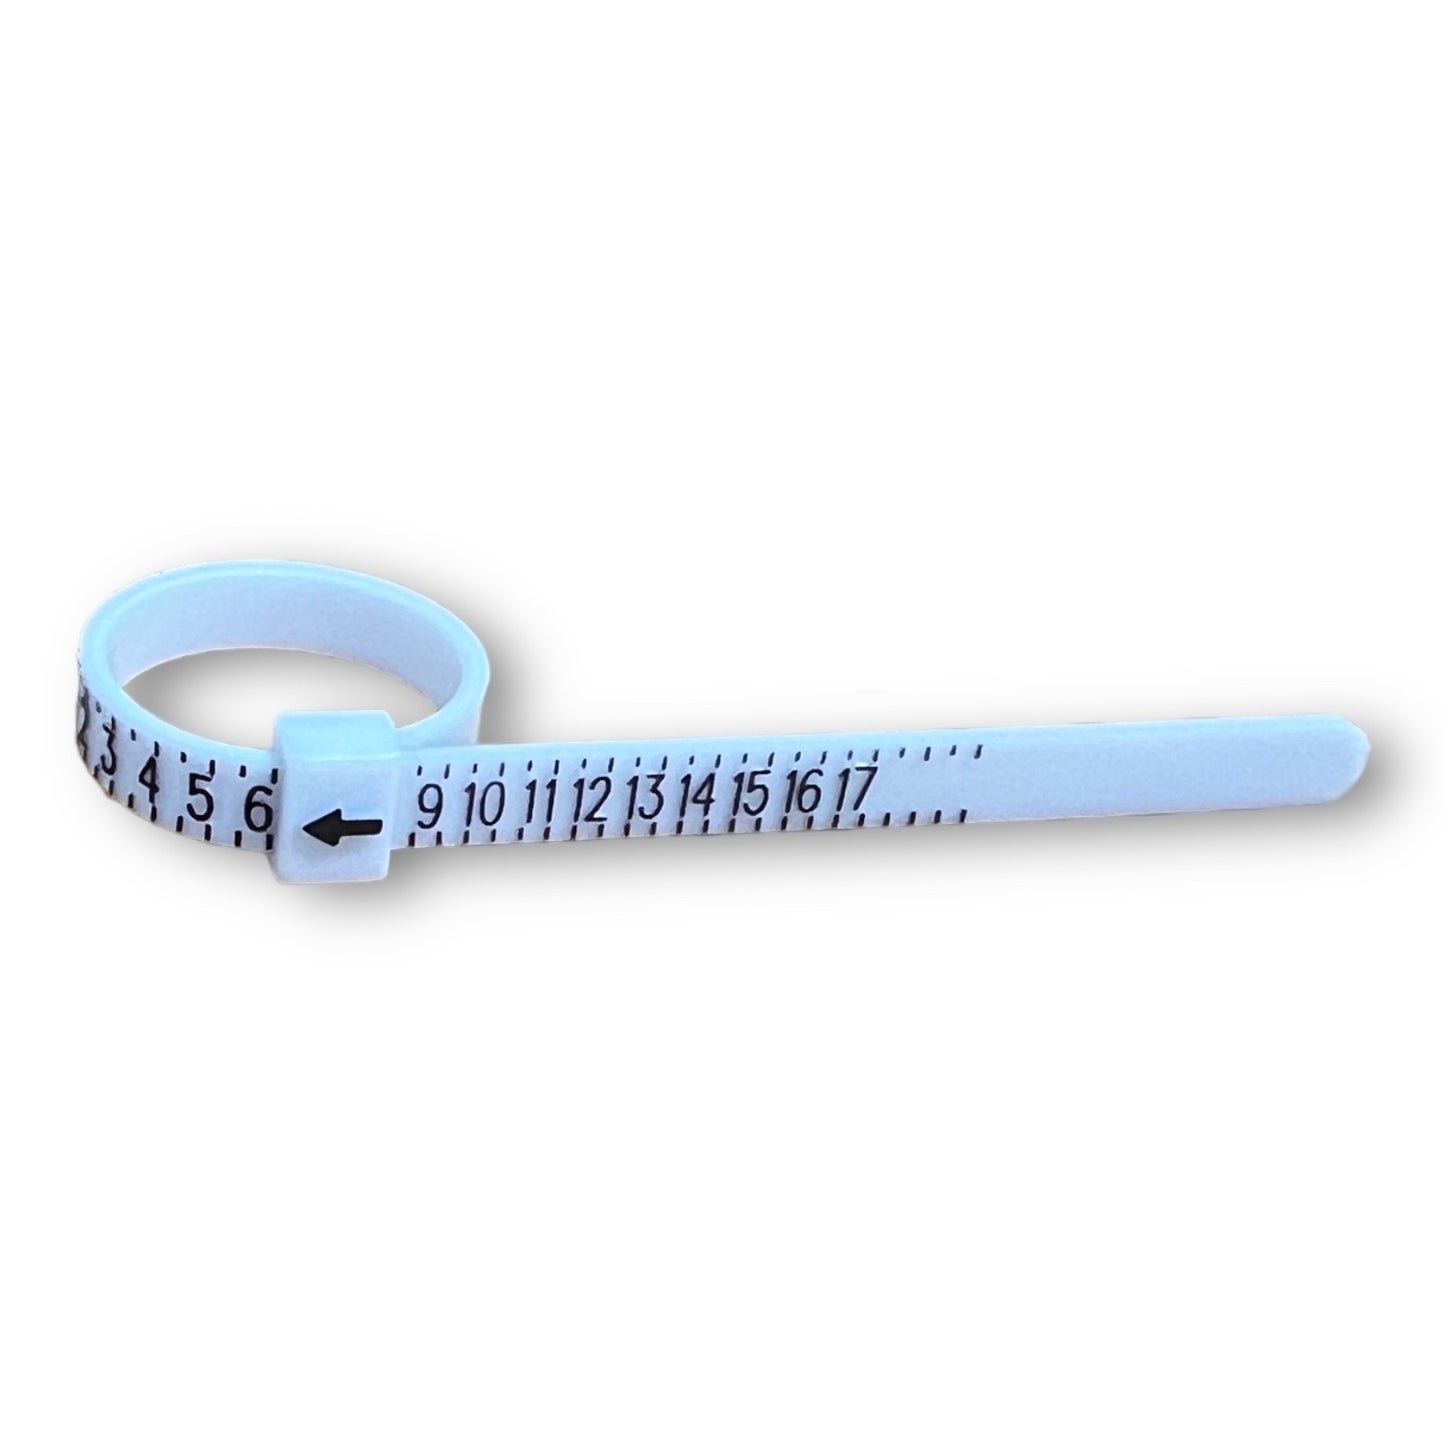 Ring Sizer - Finger Measuring Tool for Sizing Rings